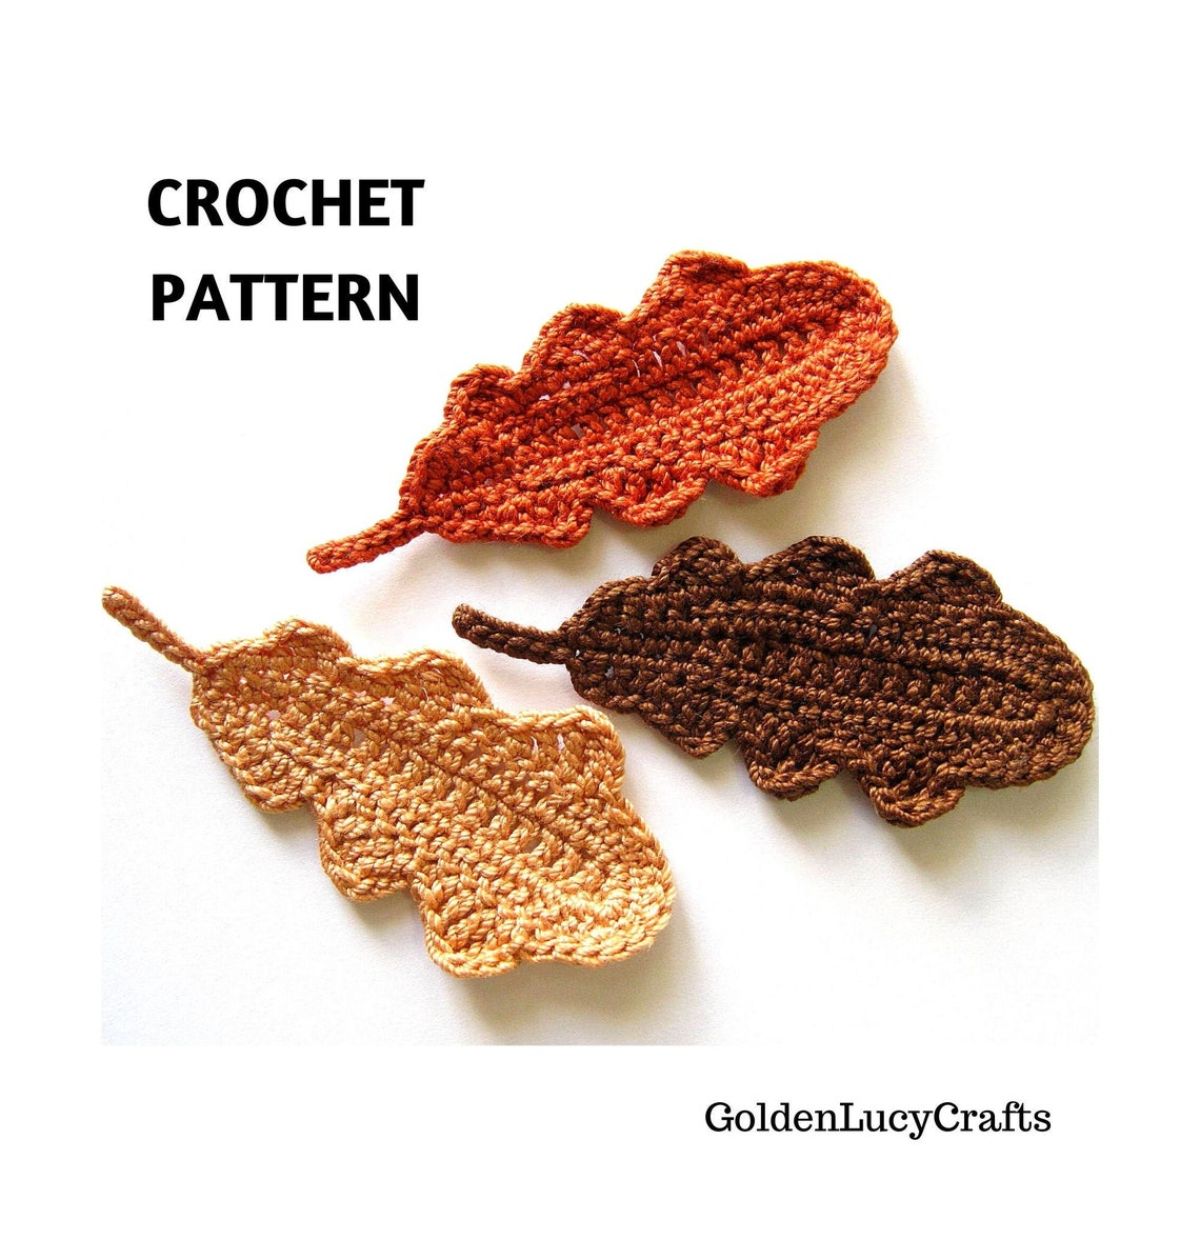 Three crochet oak leaves in yellow, orange, and brown lying next to each other with small stems on a white background.